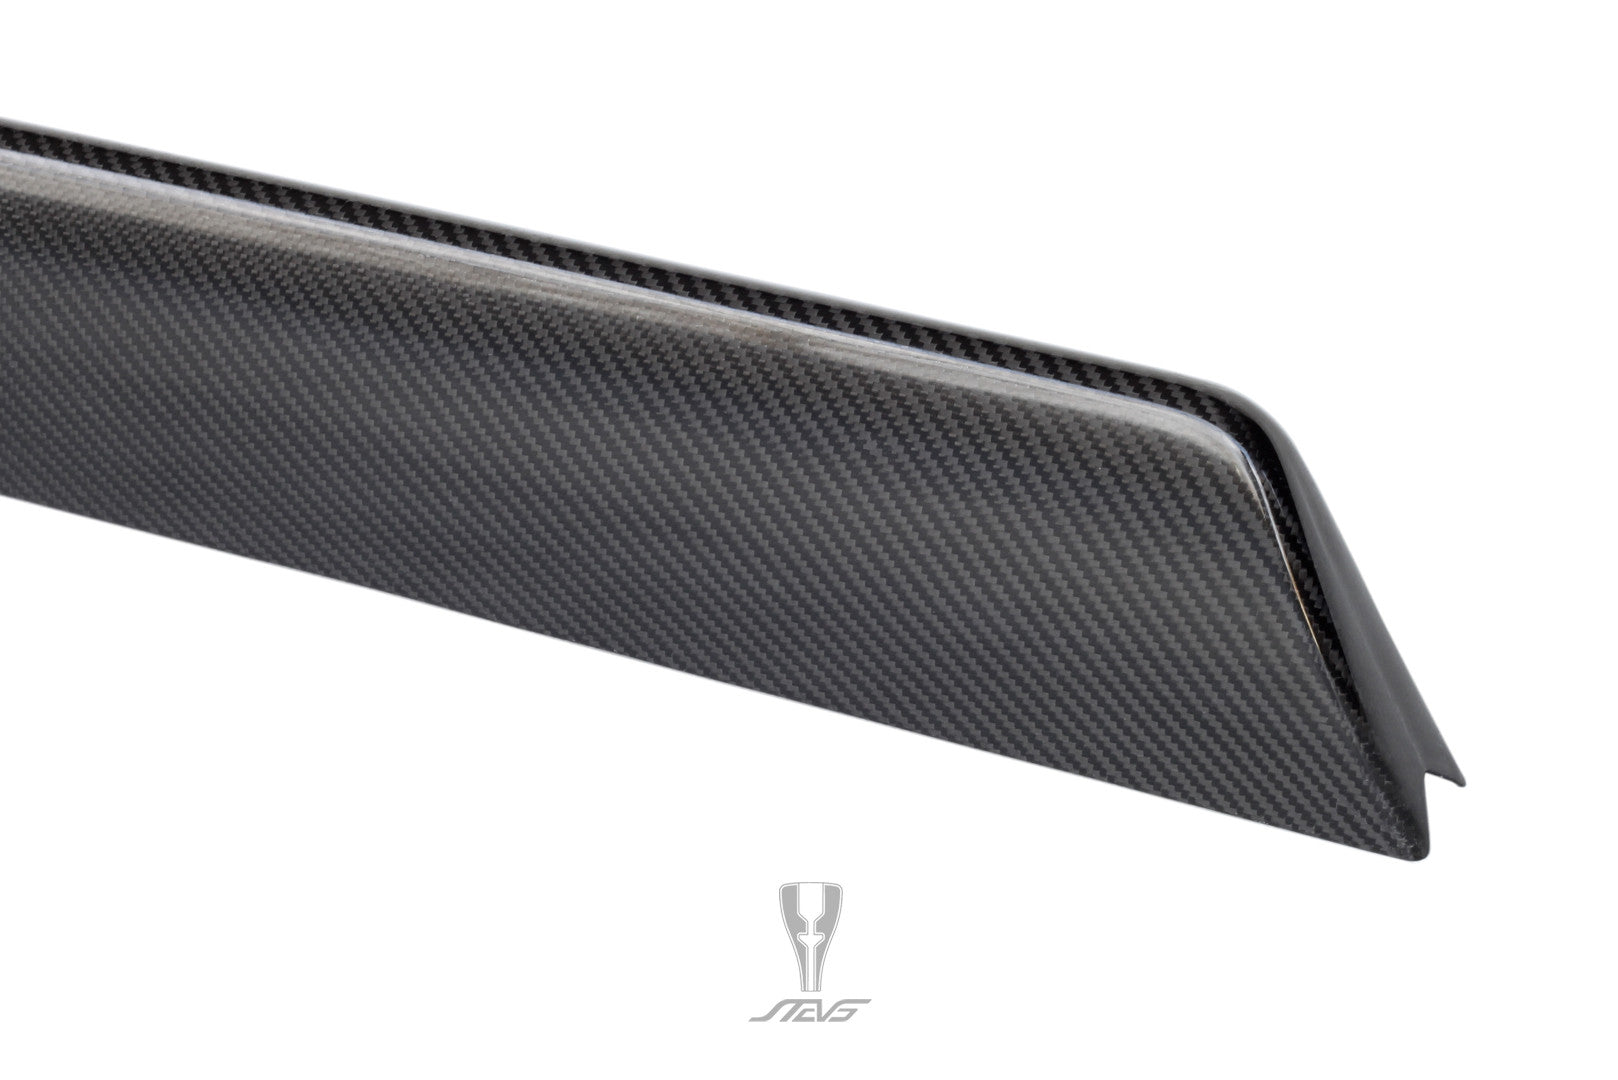 STEVS Crown carbon fiber wing extension, rear angle close up view